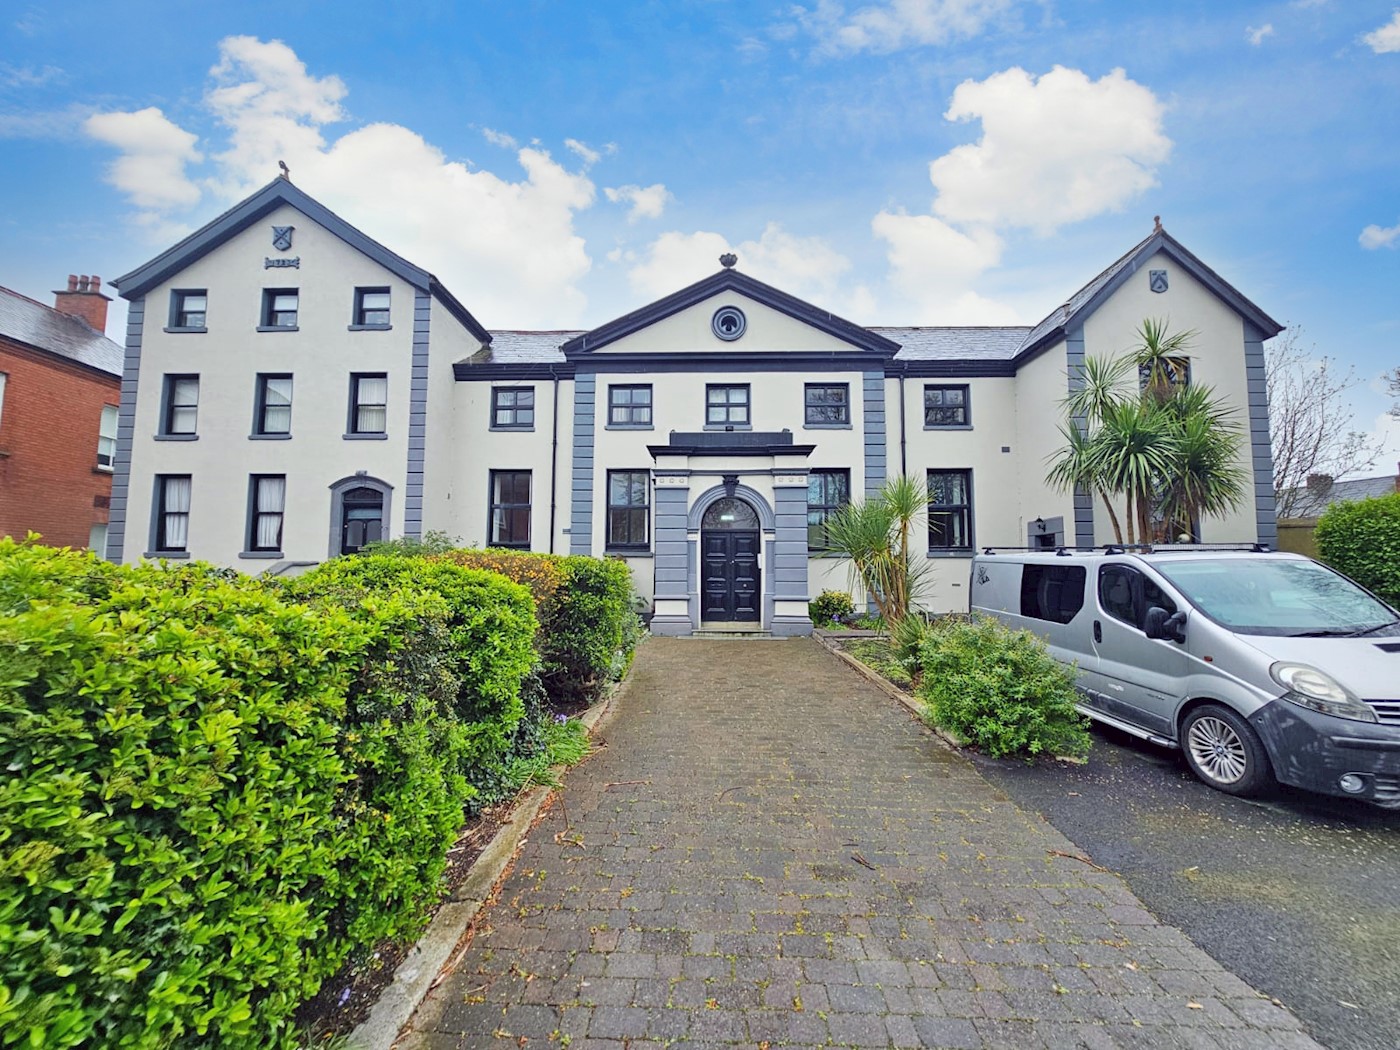 Apartment 9 Old Library Chapel Street, Dundalk, Co. Louth, A91 H573 1/14